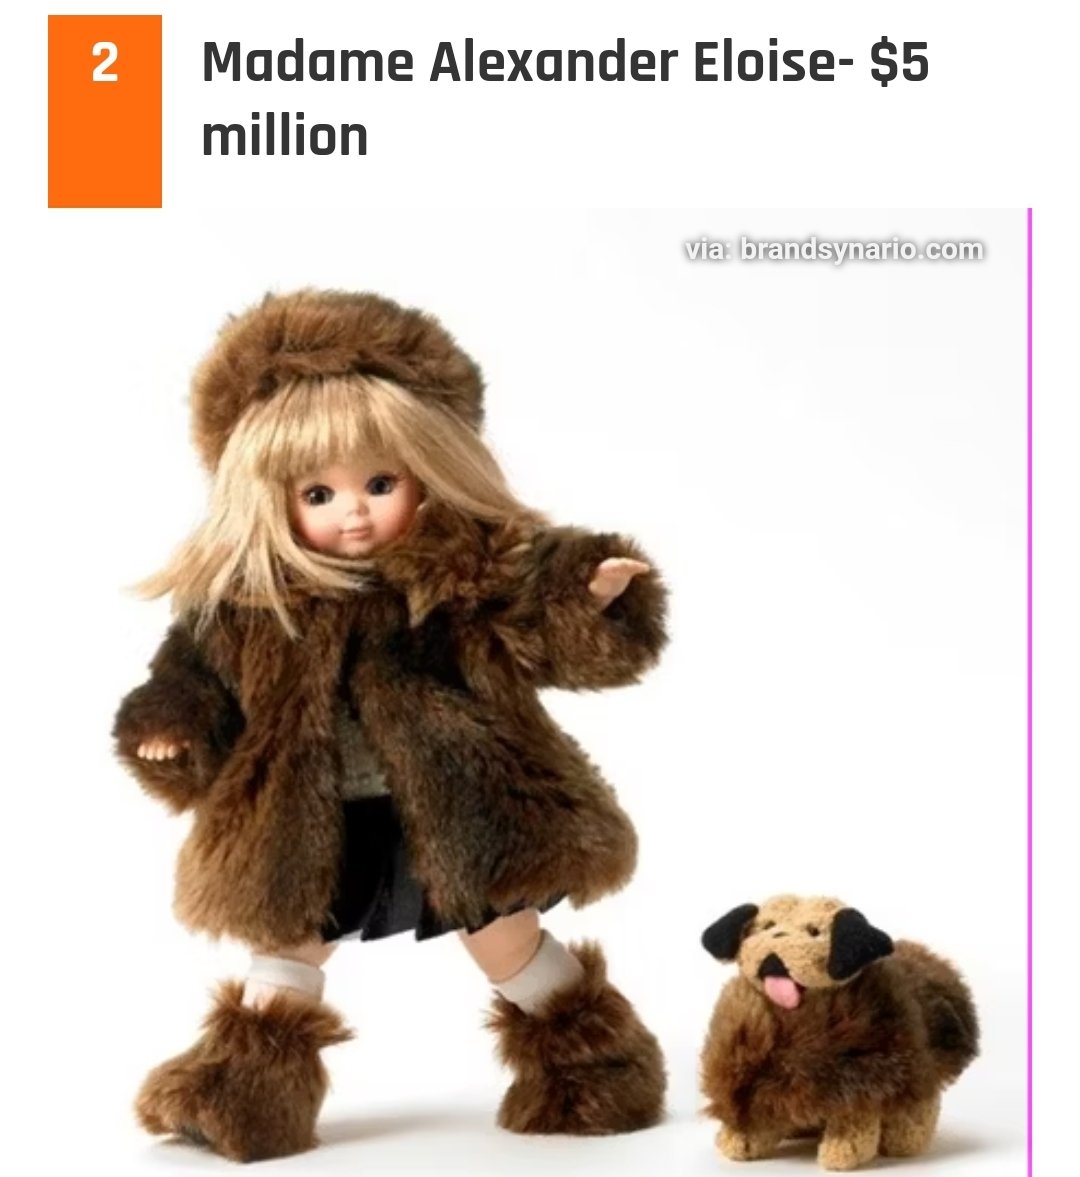 🦍𝐏𝐔𝐋𝐒𝐄 𝐀𝐏𝐄🦍 on X: 🚨 #Hexicans🚨 THREAD: Top 5 Expensive Dolls  in the World: 1. L'Oiseleur (The Bird Trainer) - $6.25M 2. Ma